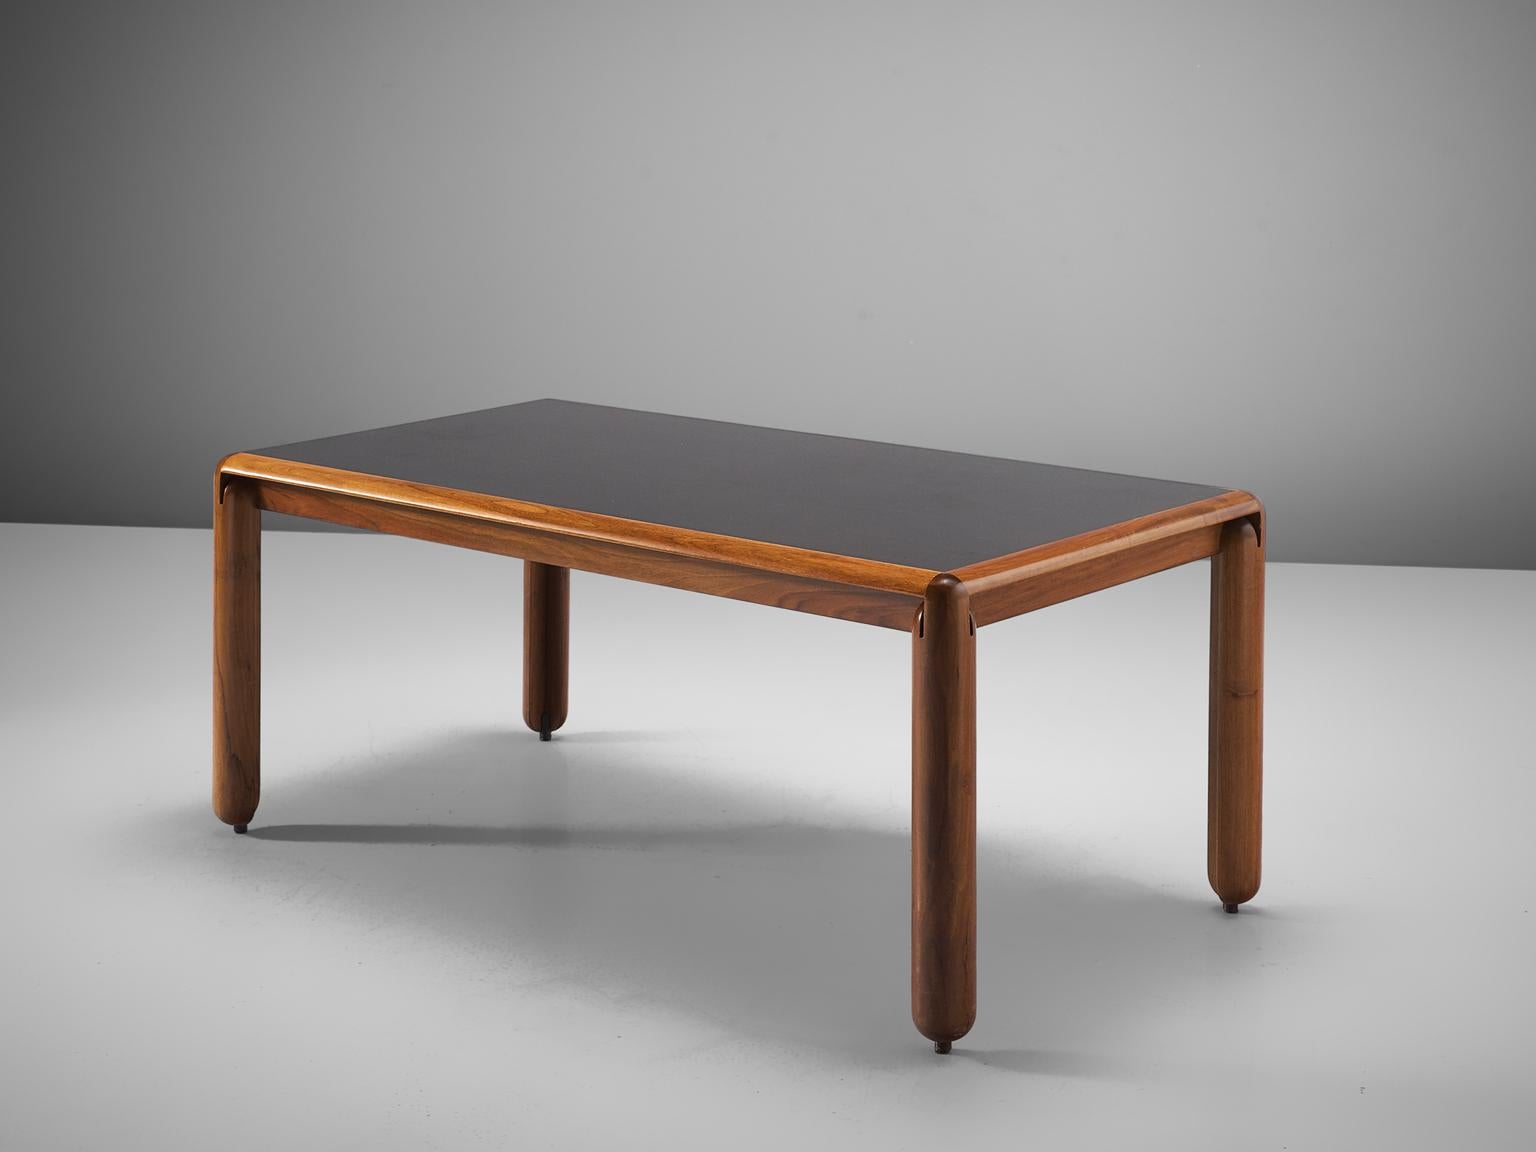 Vico Magistretti for Cassina, dining table, walnut and black lacquered wood, Italy, circa 1967.

Well detailed dining table designed by Vico Magistretti. The table features cylindrical legs and small bull point feet, which creates the illusions